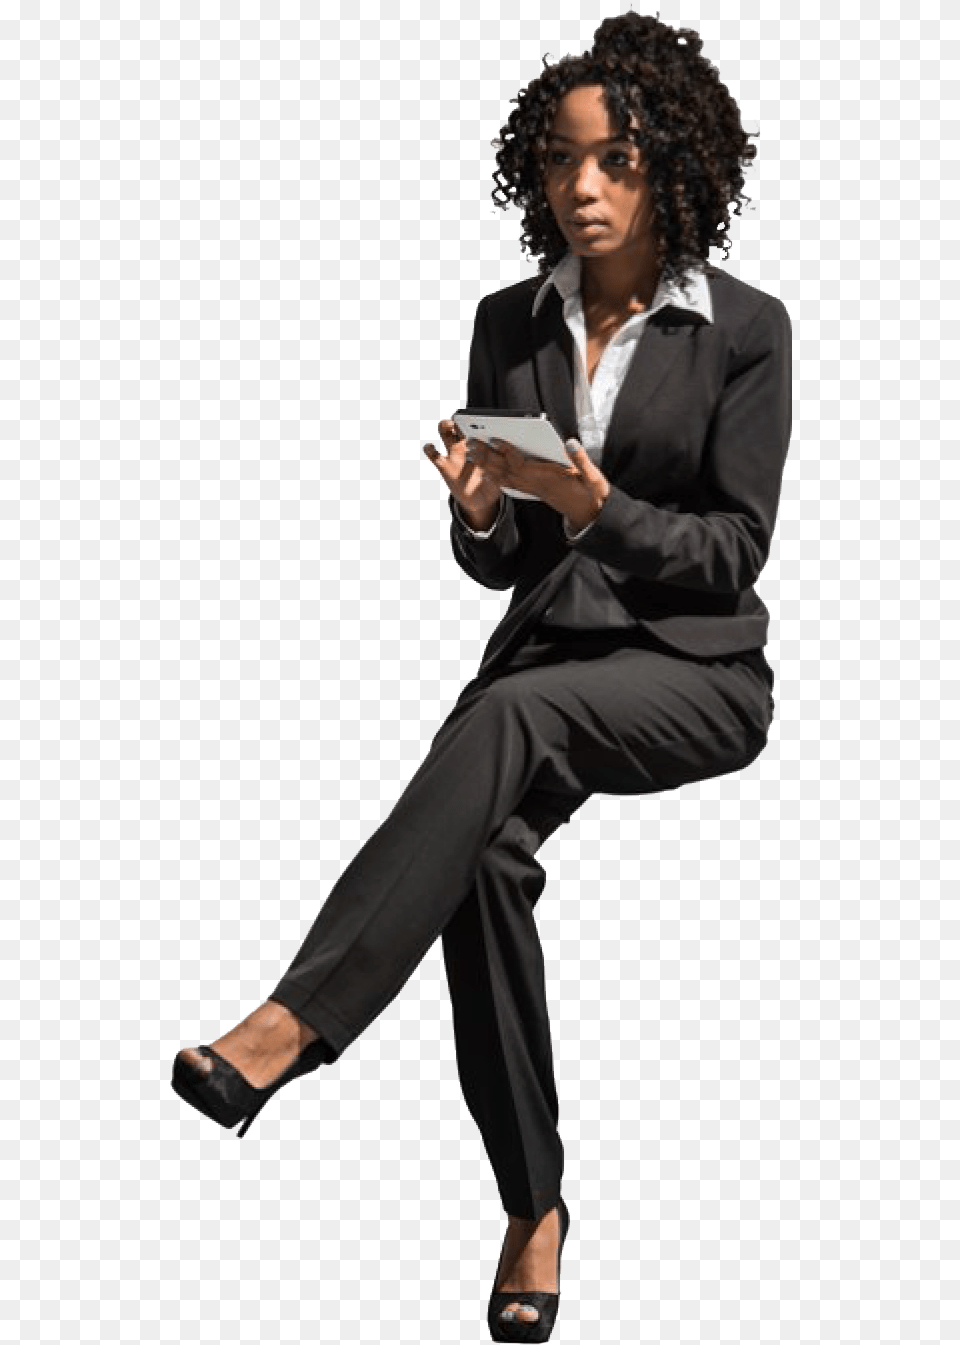 Cutout Woman Sitting People Cutout Cut Out People Cut Out People Sitting, Suit, Formal Wear, Clothing, Reading Free Transparent Png